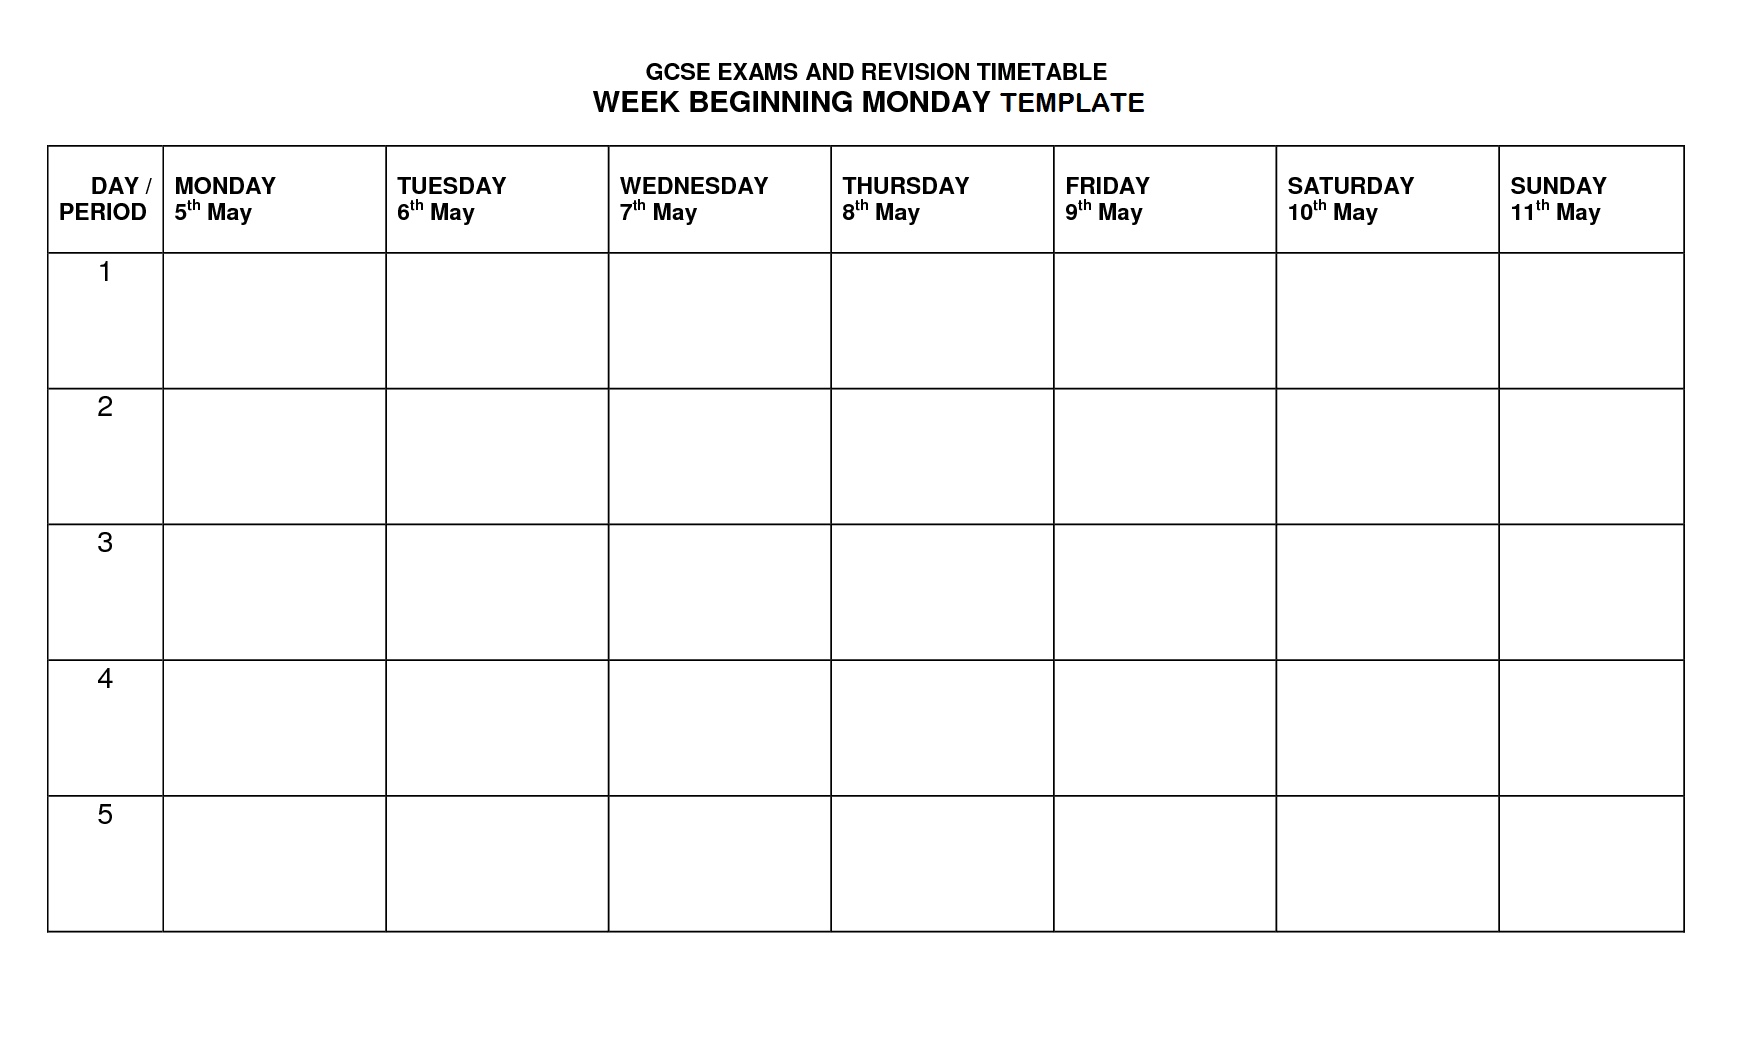 Timetable Template | Timetable Template, Class Schedule Throughout Blank Revision Timetable Template